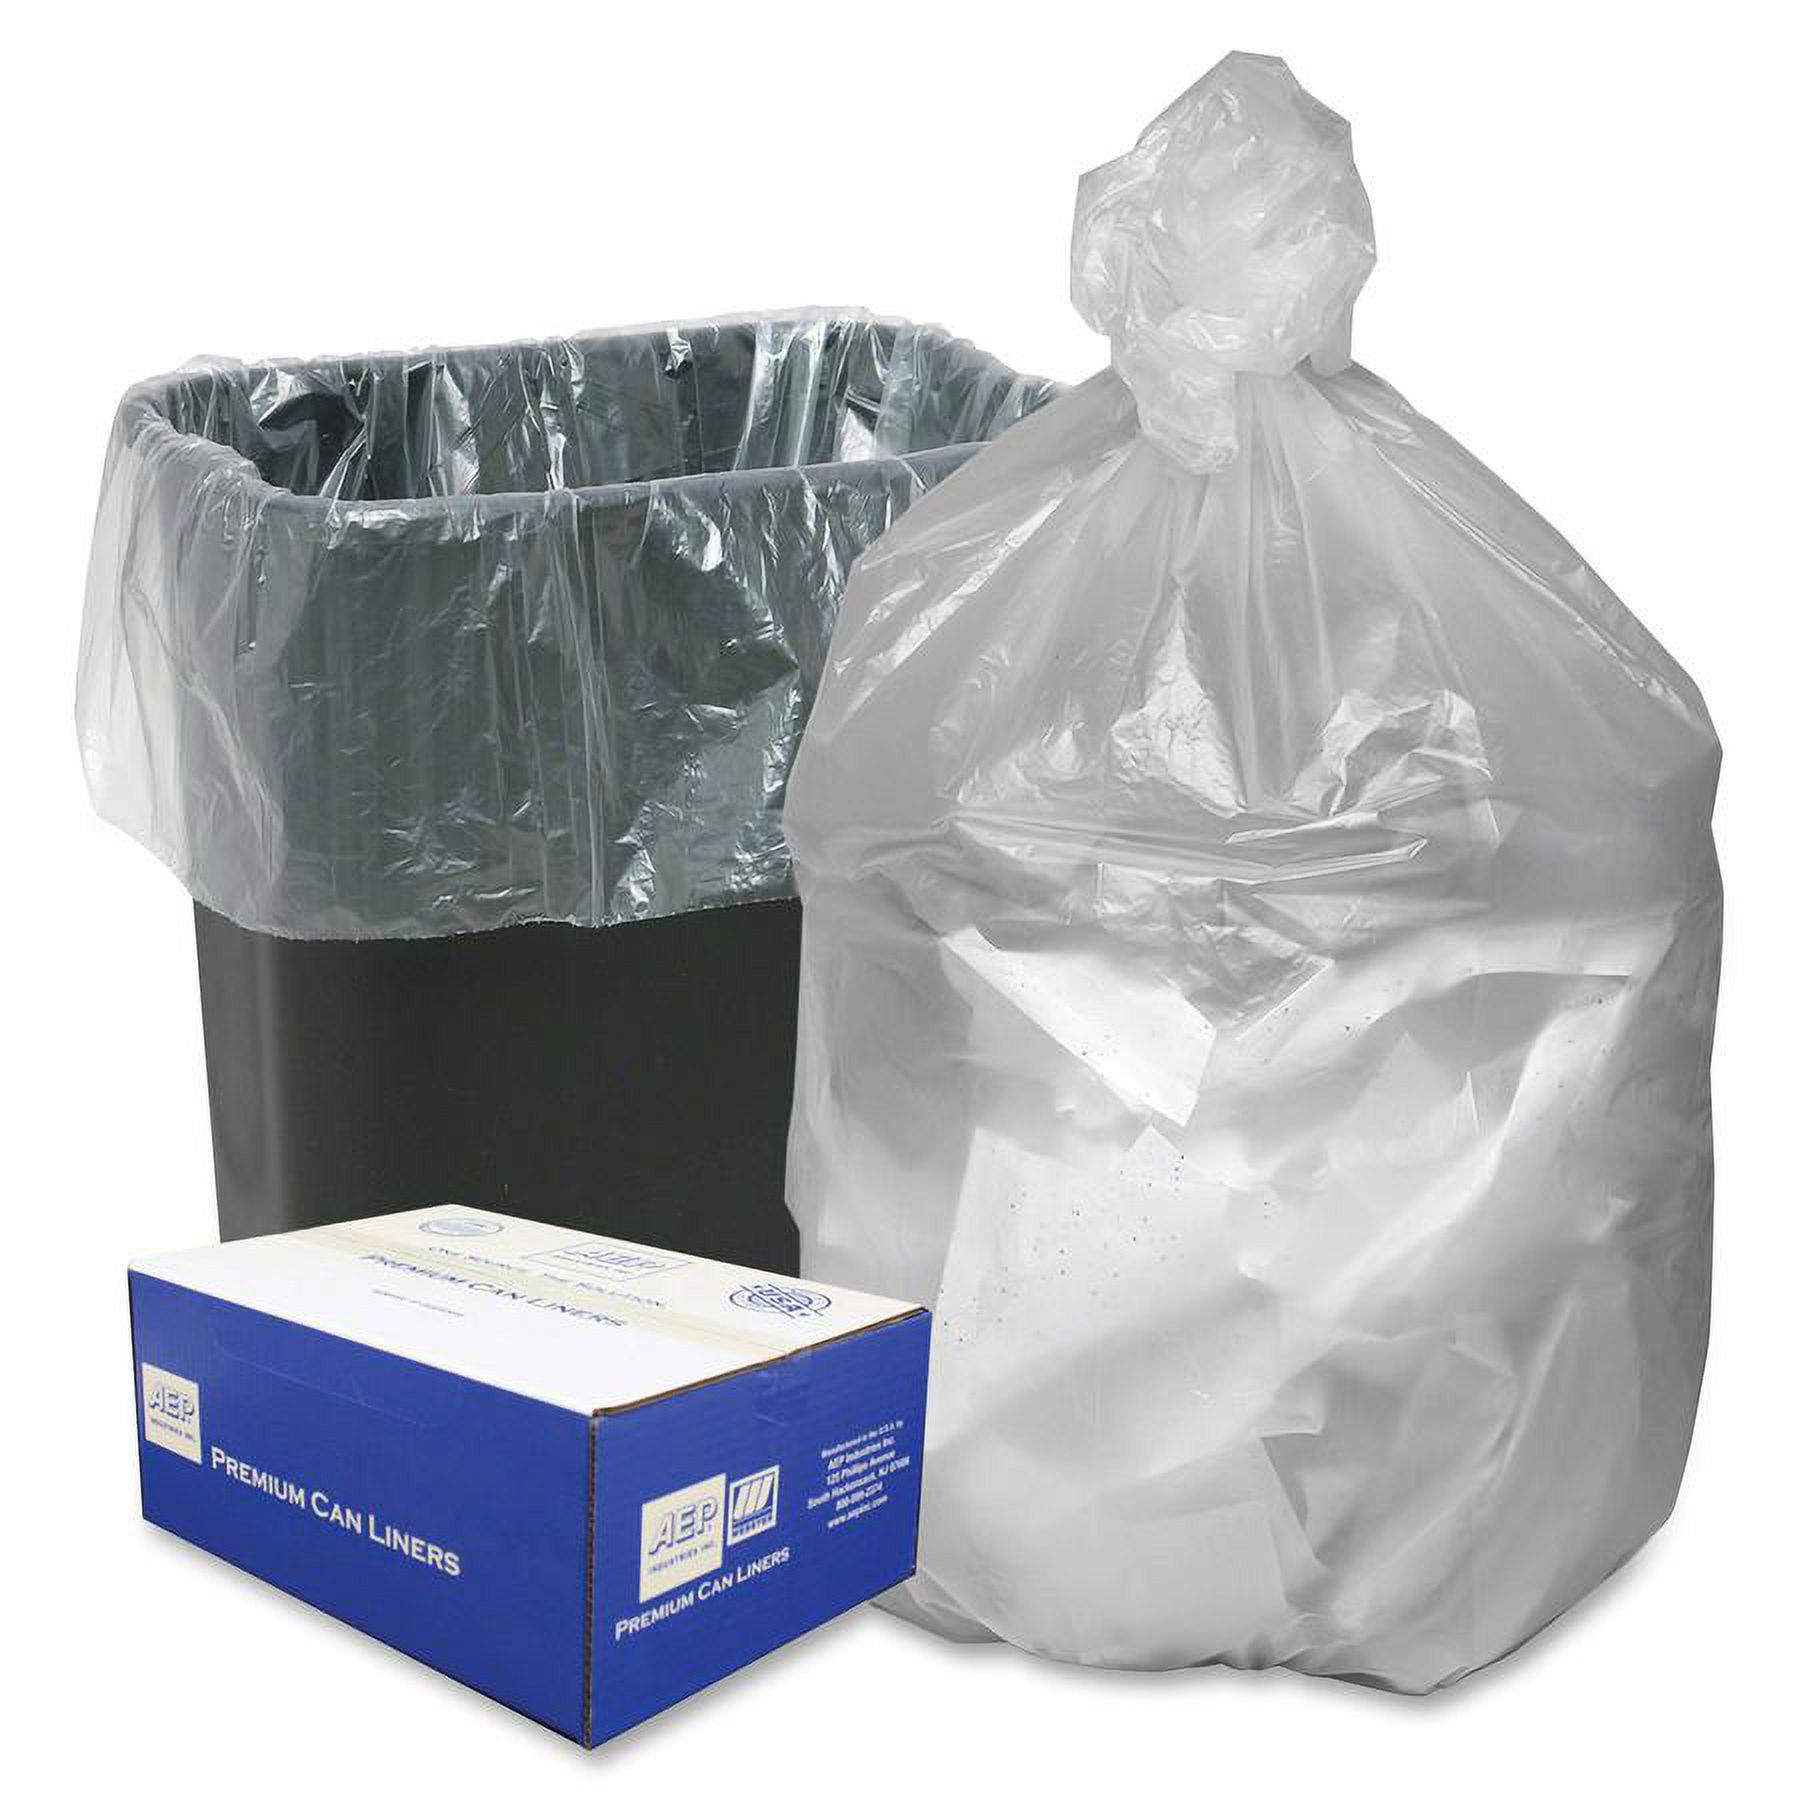 Webster Translucent Waste Can Liners, 16 Gallon, 1000 Count - image 2 of 2